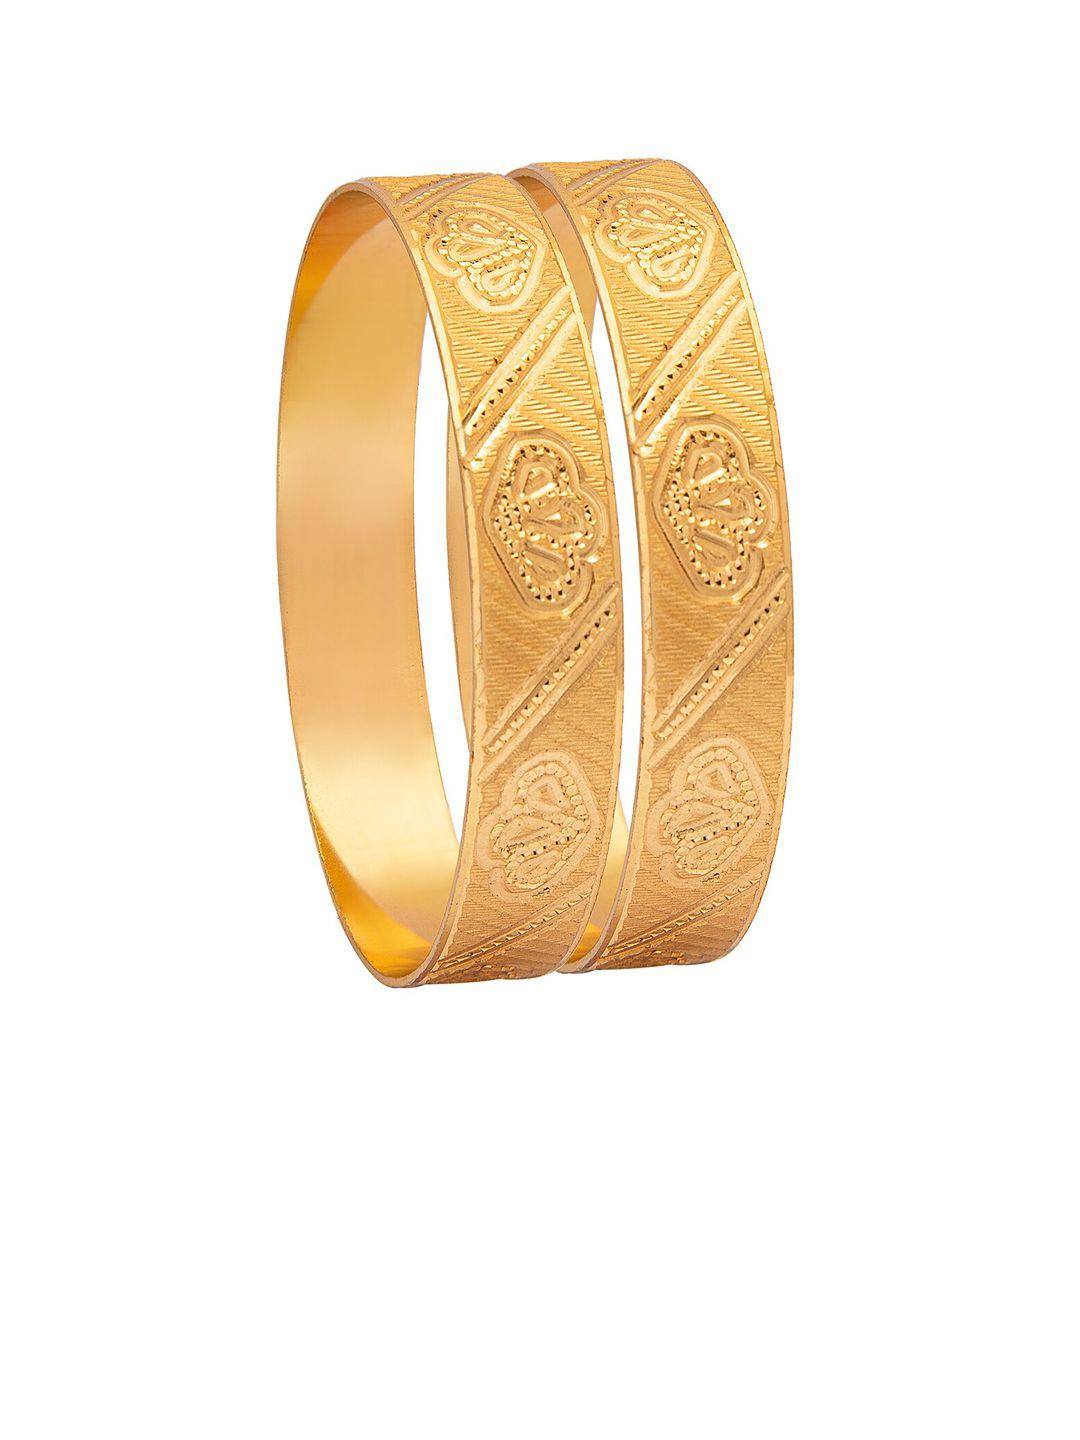 shining jewel - by shivansh set of 2 gold-plated & toned traditional bangles